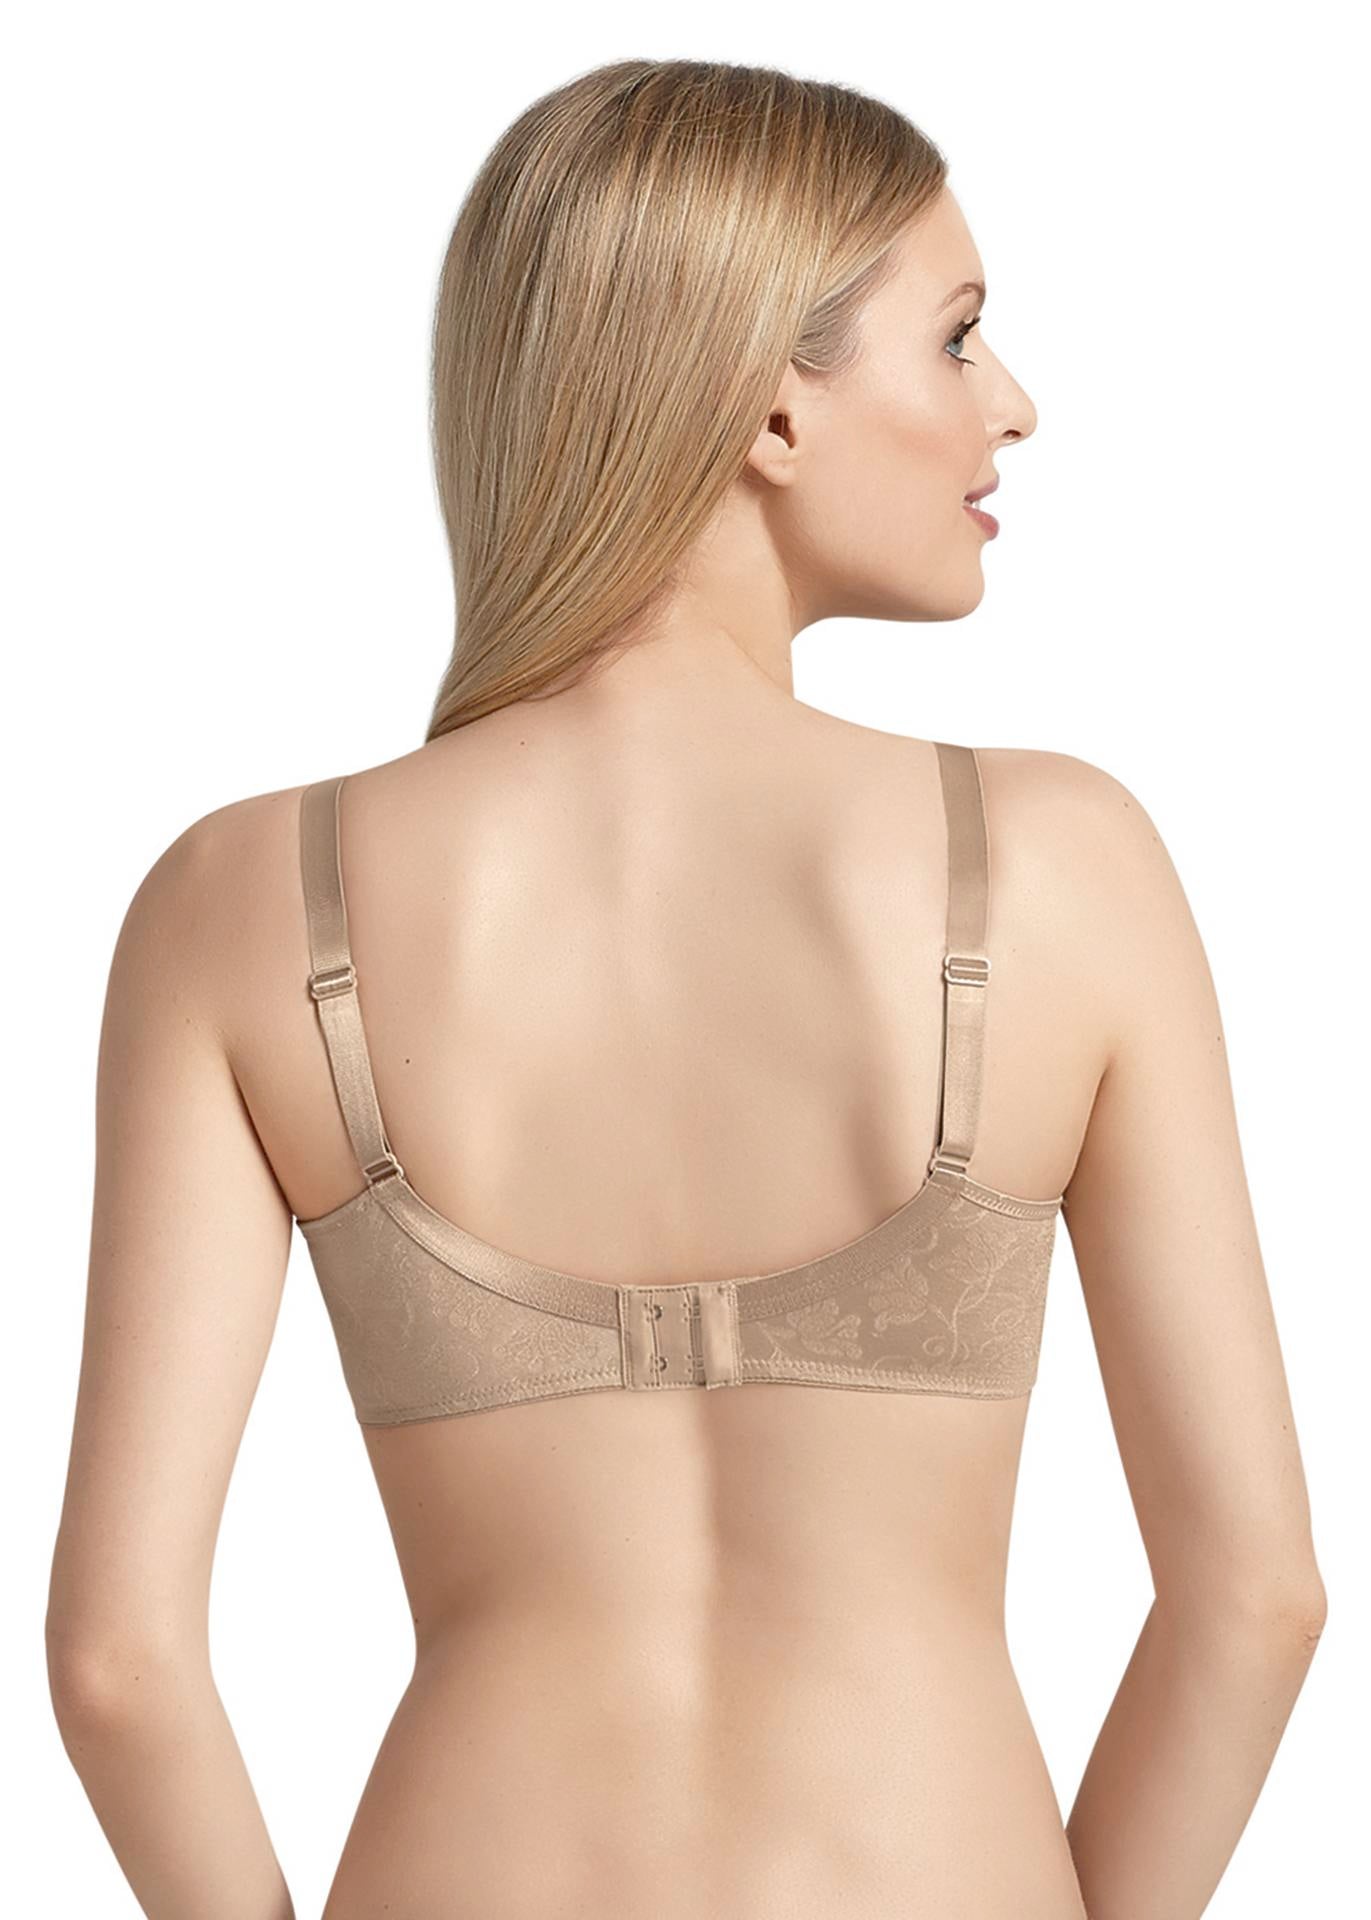  Nursing Bras with Support 36f Seamless Bralettes for